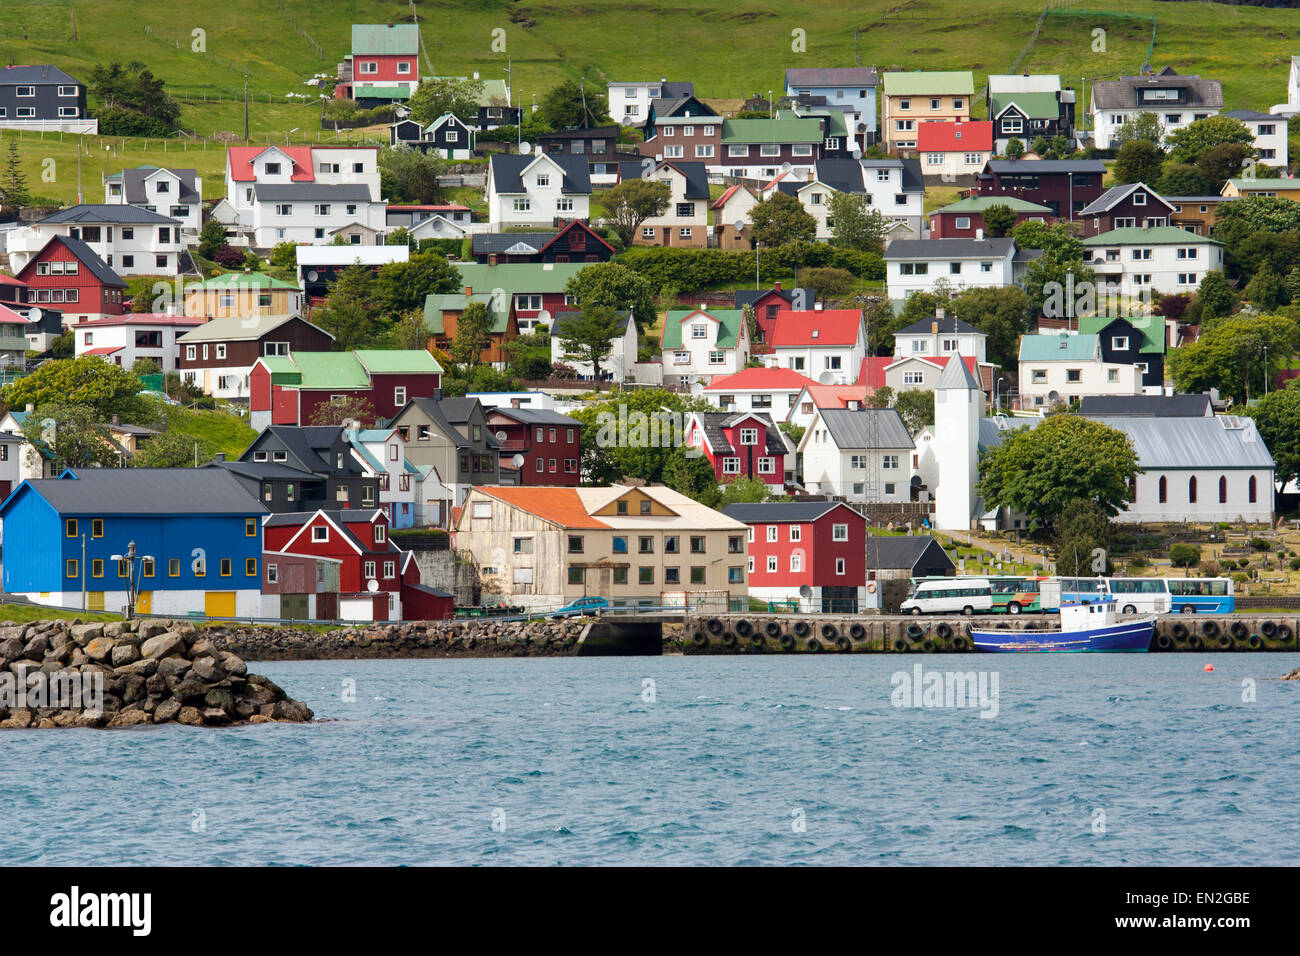 Colorful town of Vestmanna, Faroe Islands Stock Photo